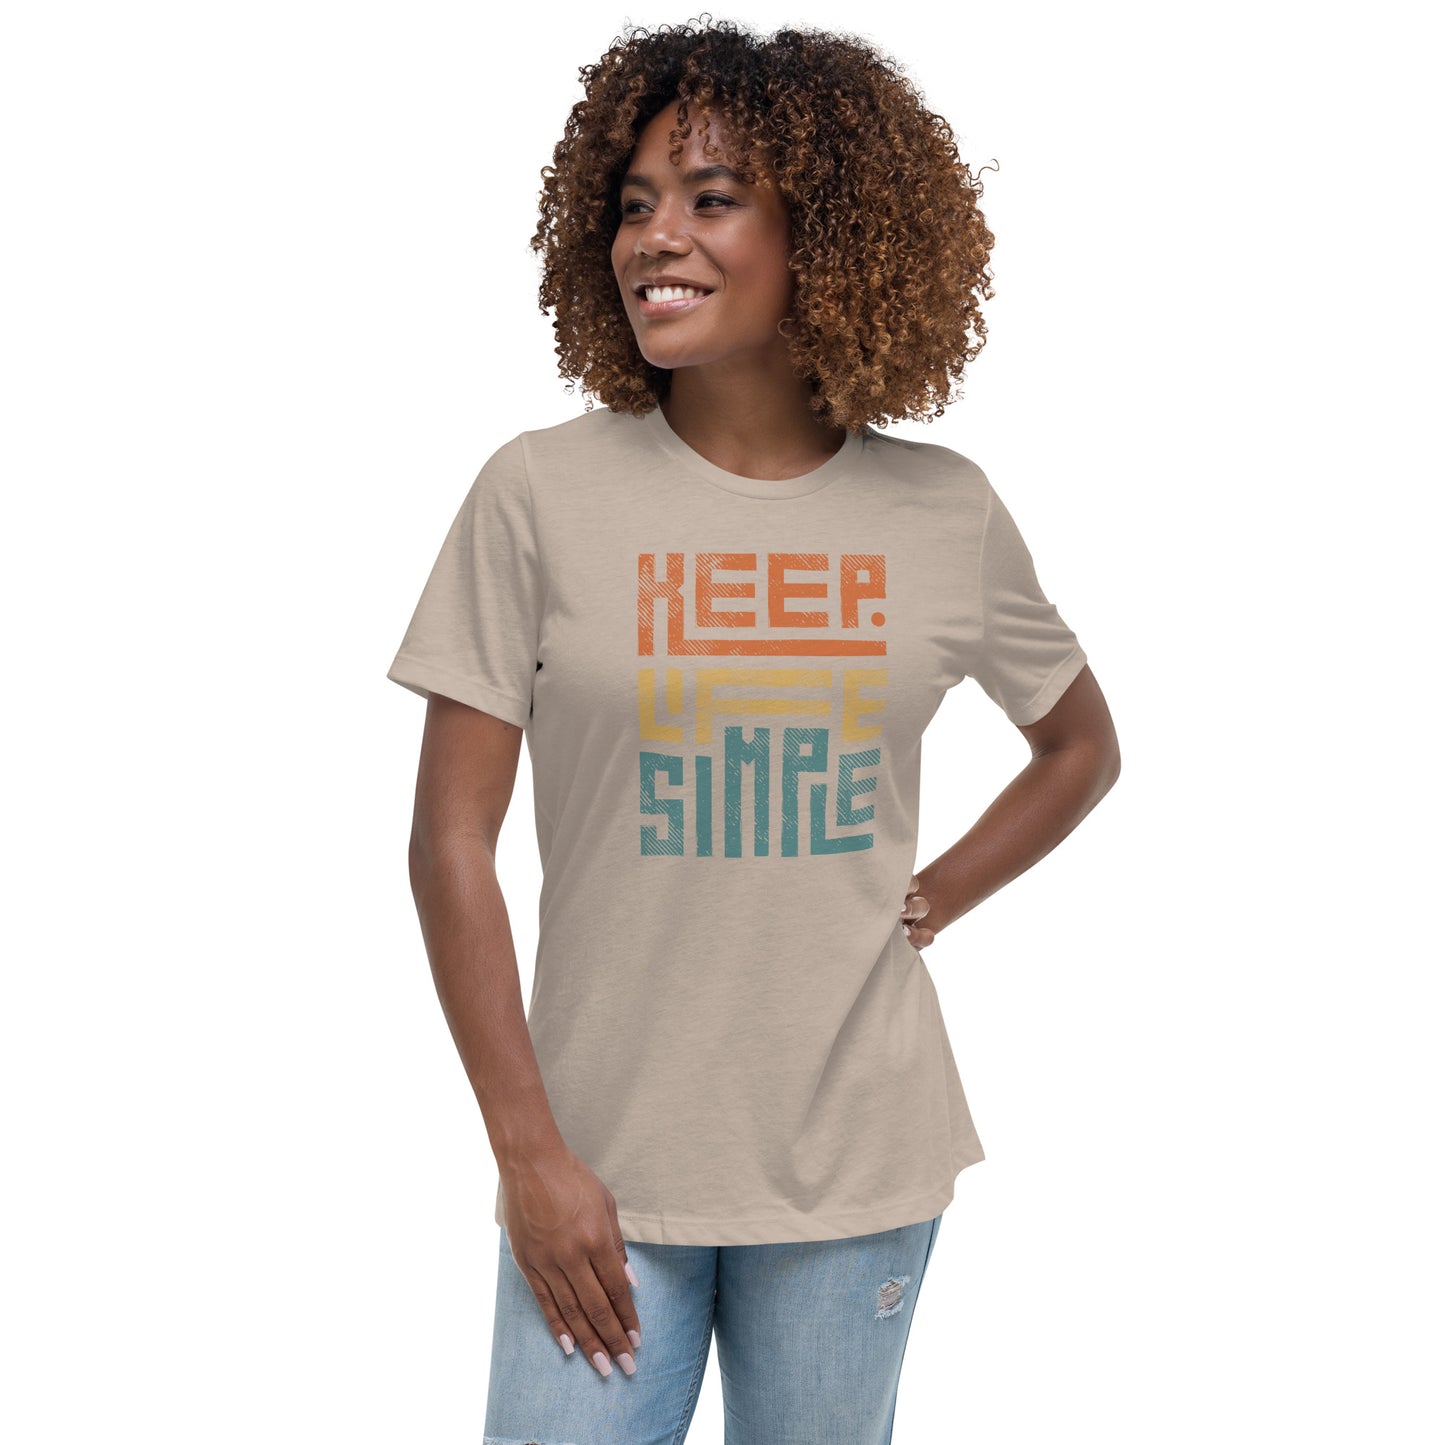 Keep Life Simple Women's Relaxed T-Shirt